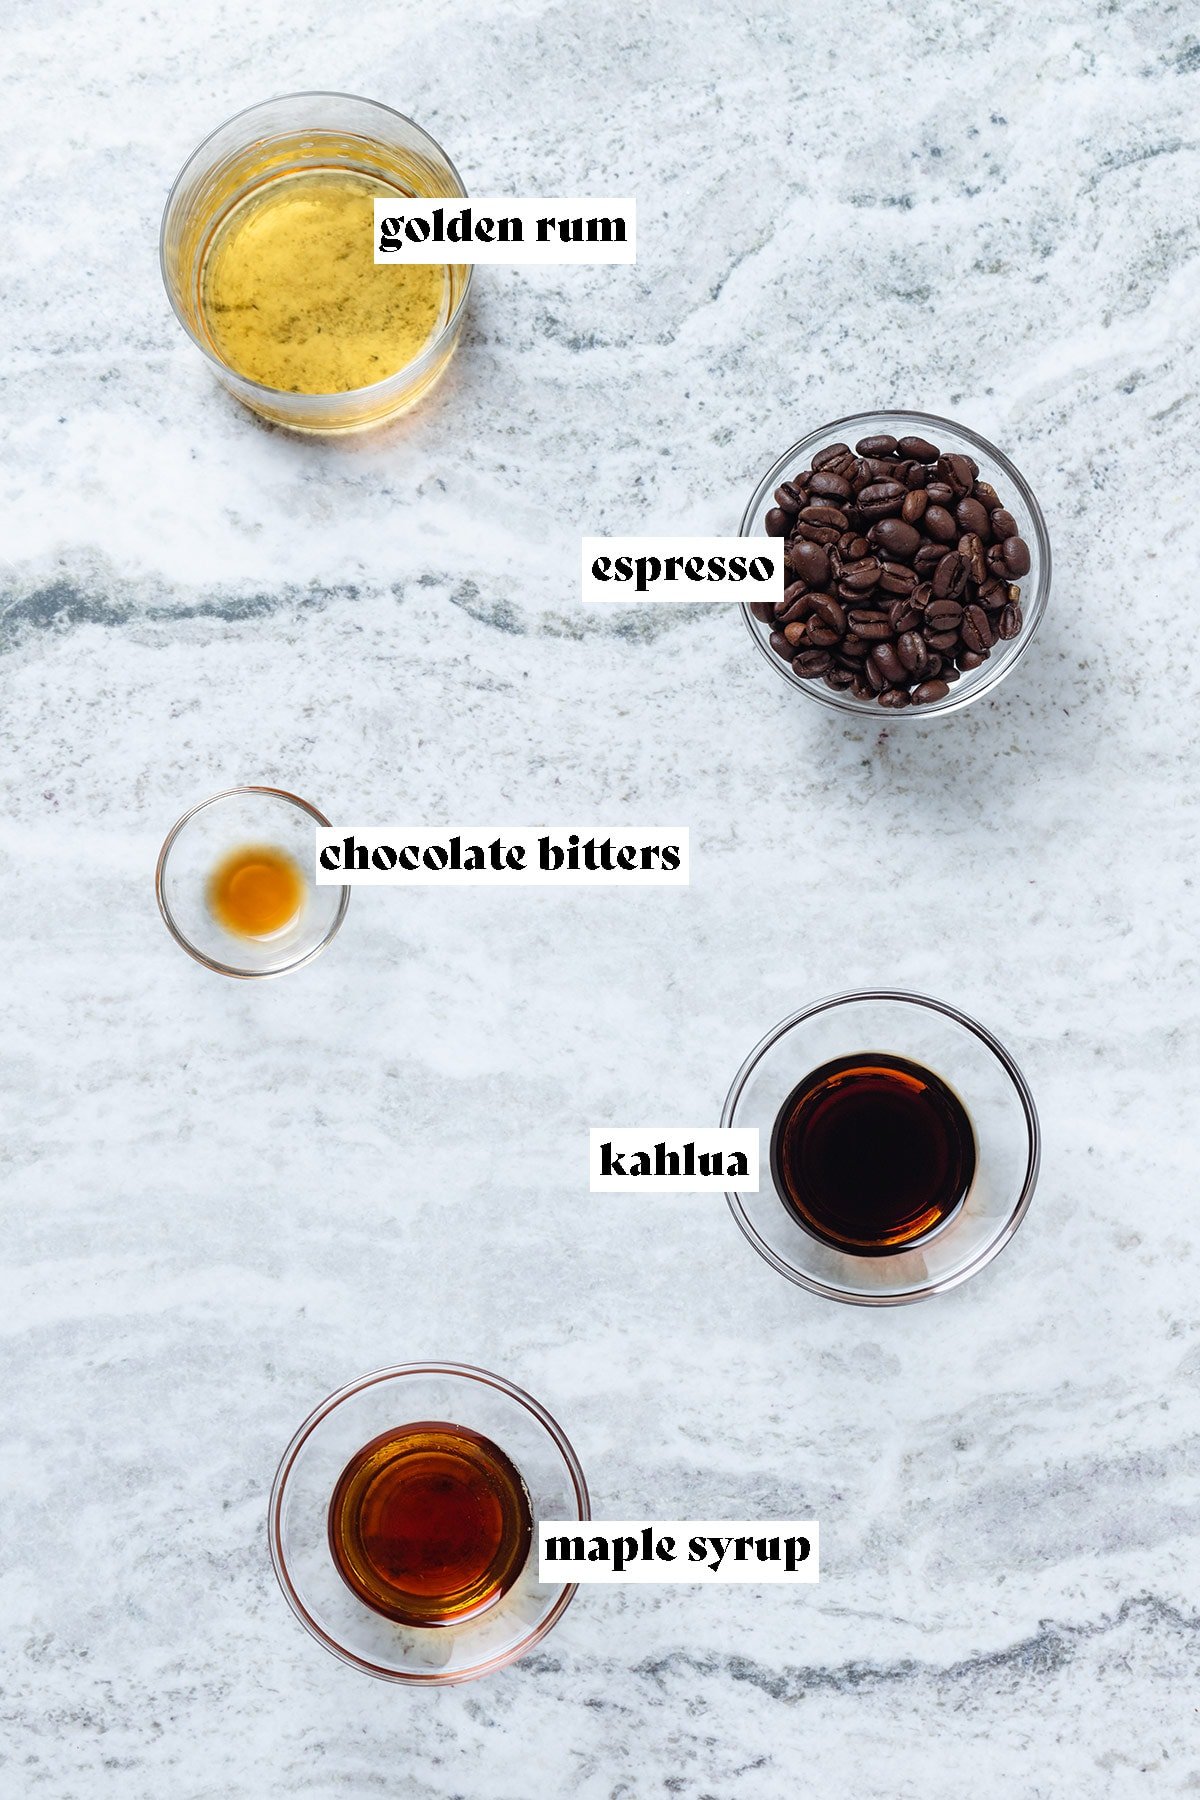 Rum, Kahlua, maple syrup, bitters, and espresso beans in small glass bowls with text overlay.